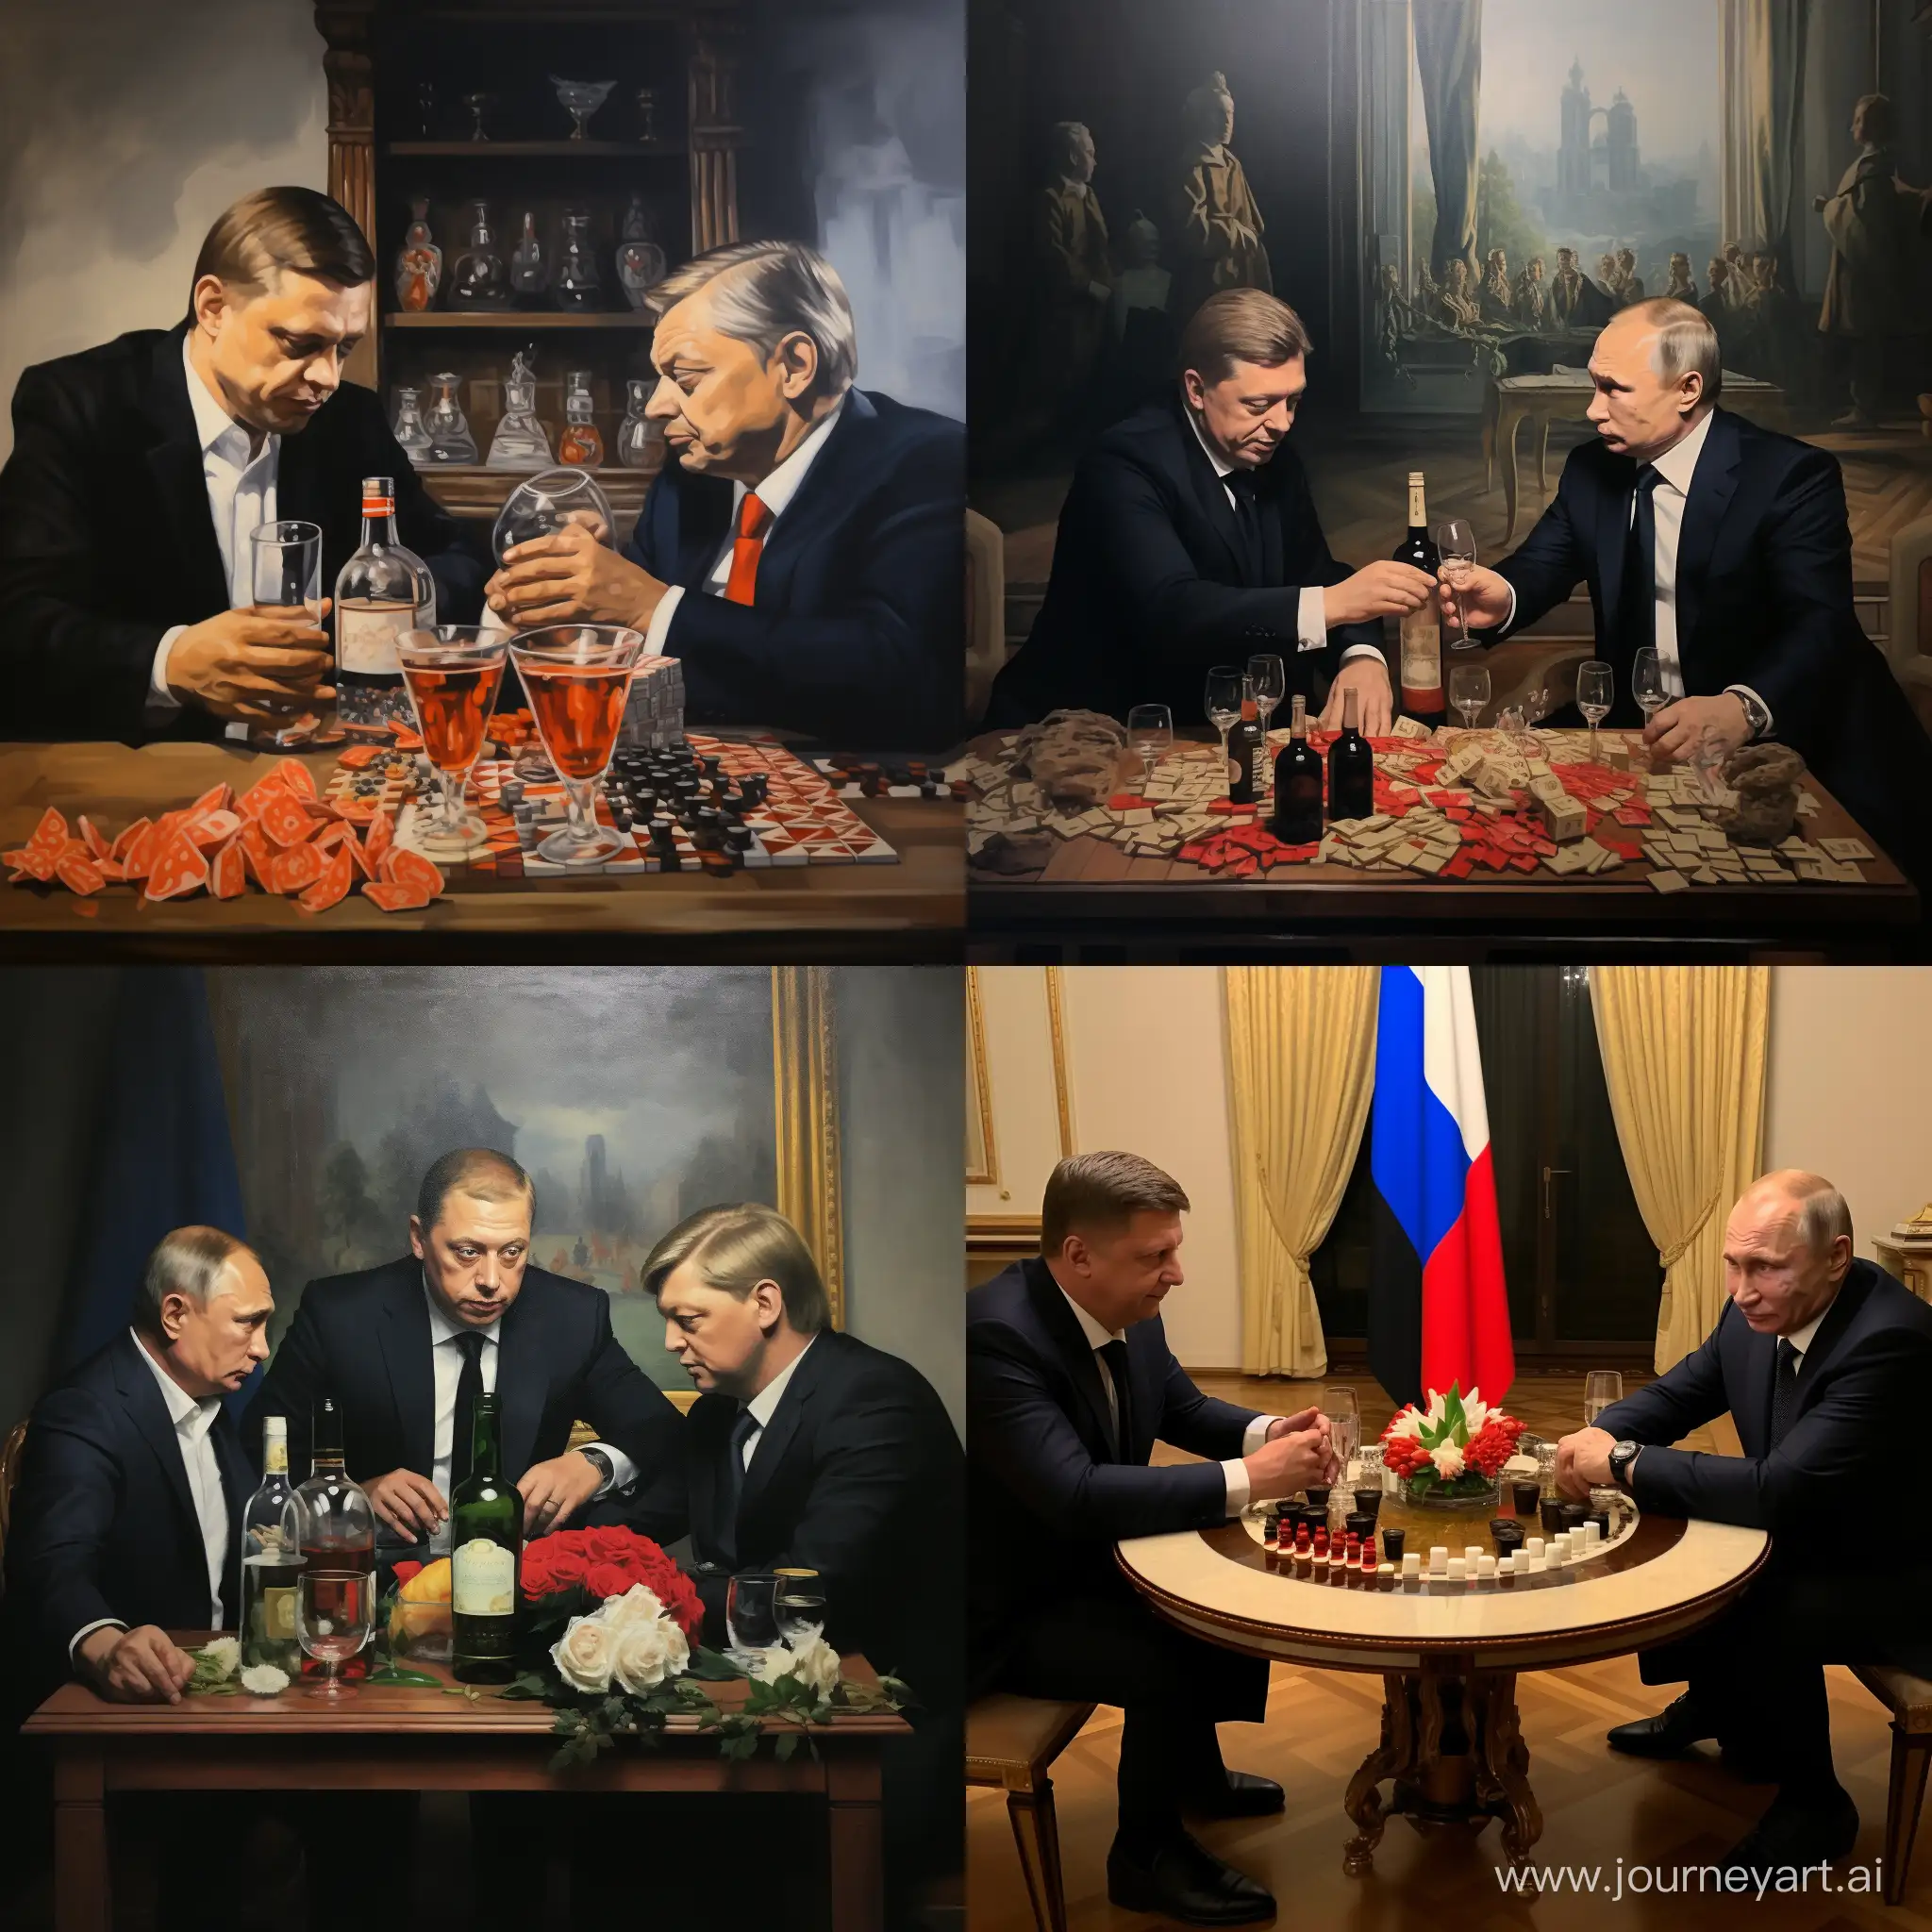 Political-Poker-Night-with-Fico-Orban-and-Putin